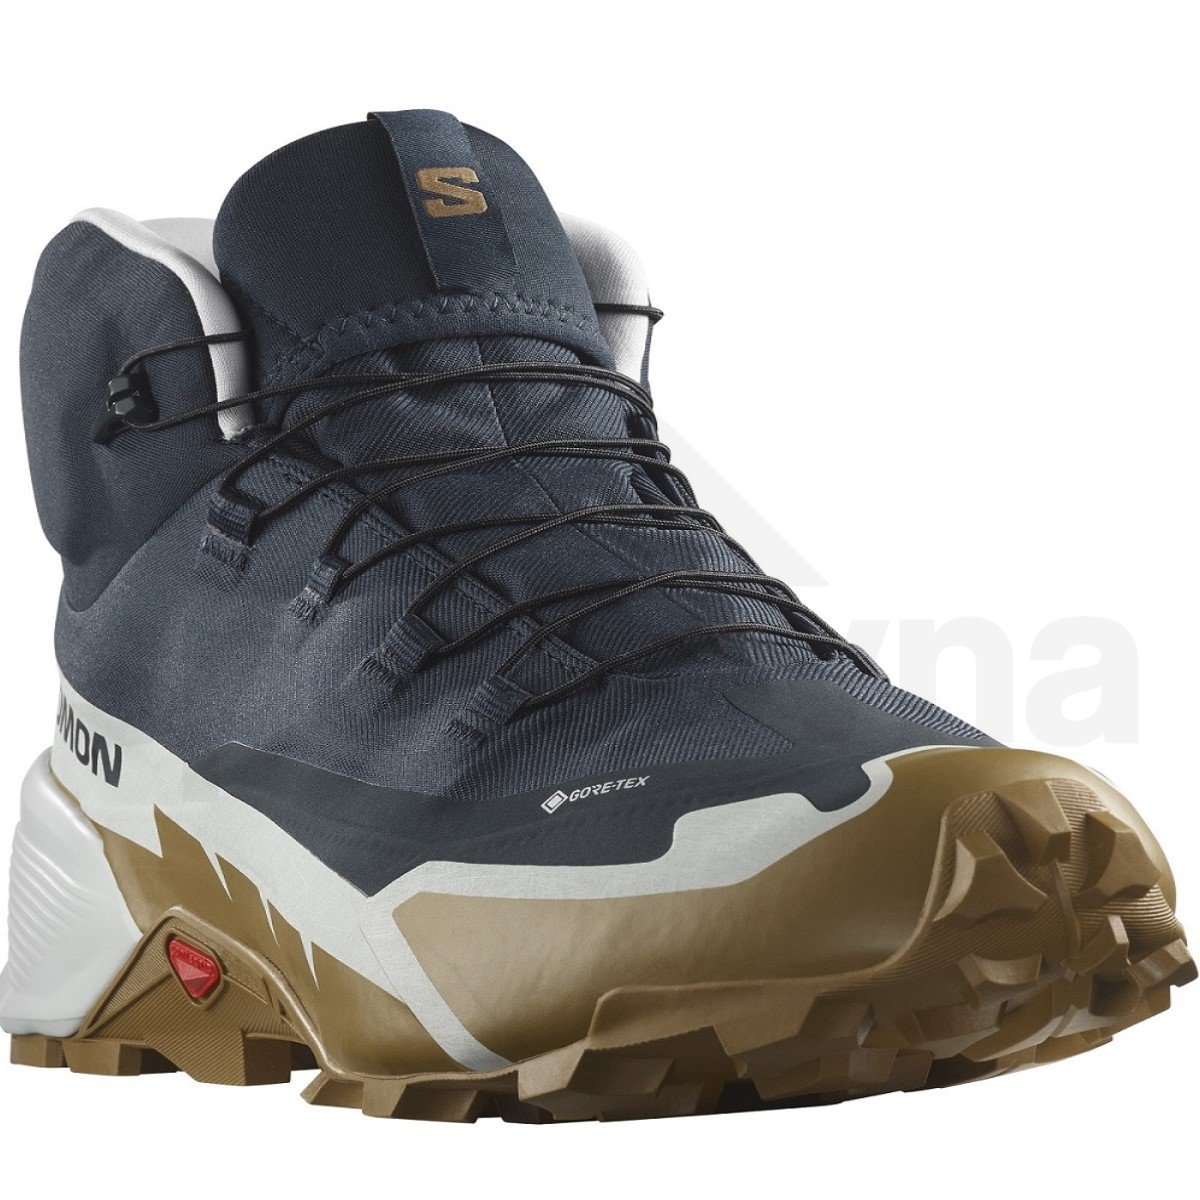 L47451400_5_GHO_CROSS HIKE 2 MID GTX_Carbon_Glacier Gray_Bronze Brown.png.high-res